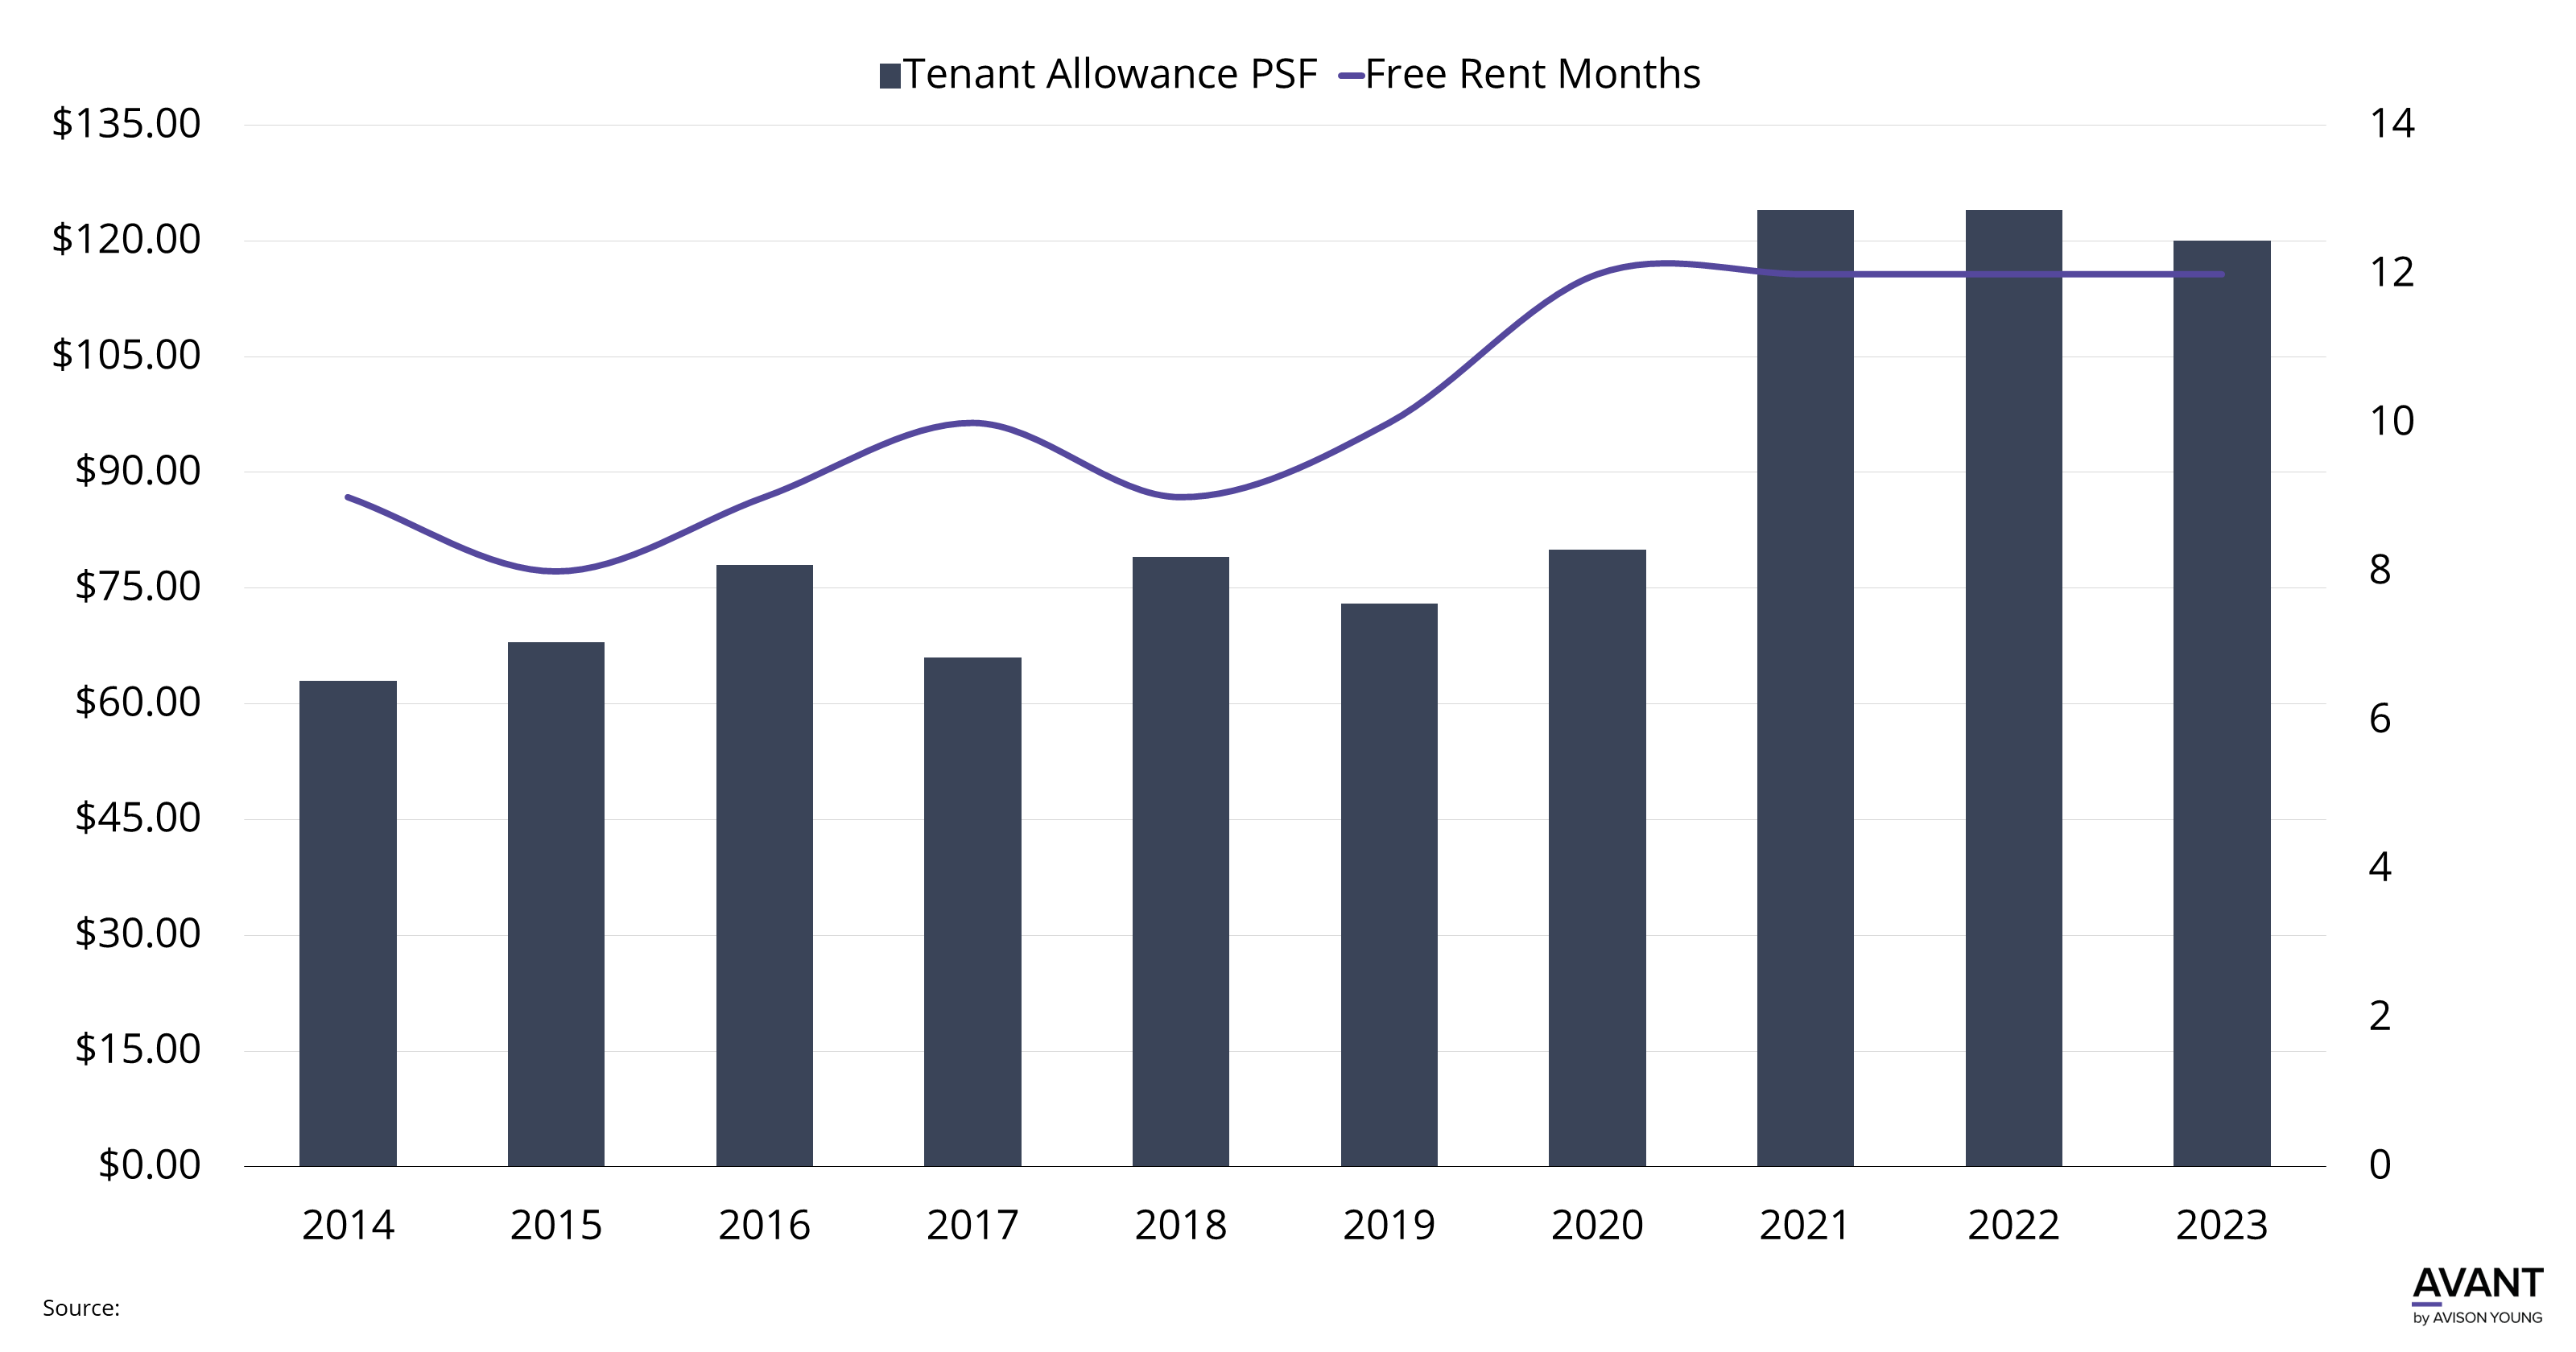 The chart displays the increase in tenant allowances PSF dating back to 2014